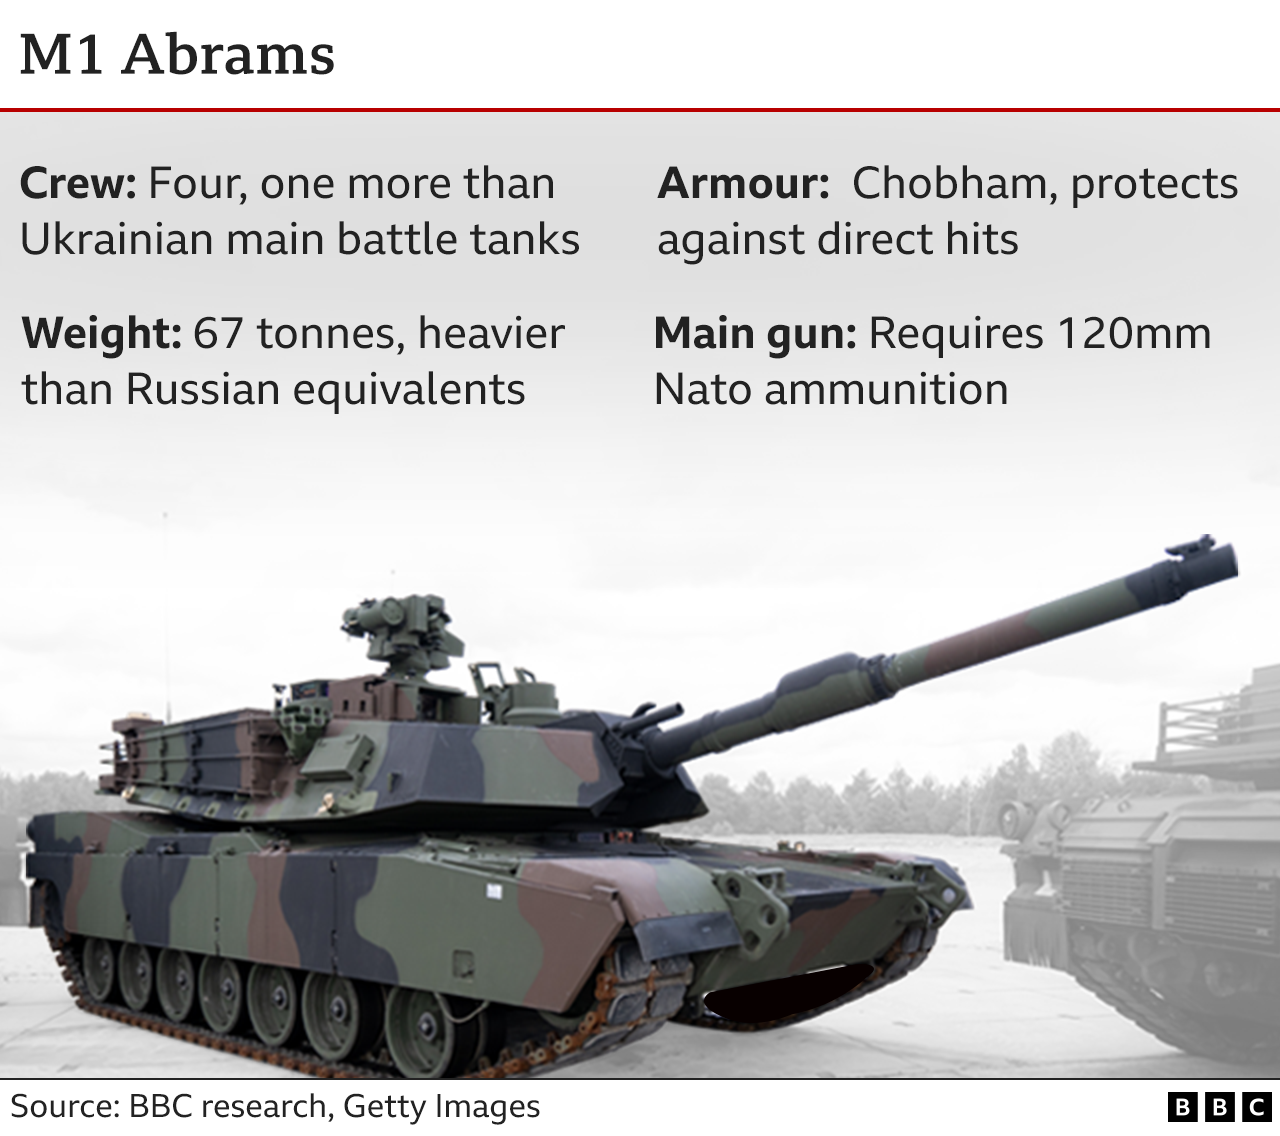 Graphic showing details of the US M1 Abrams tank.